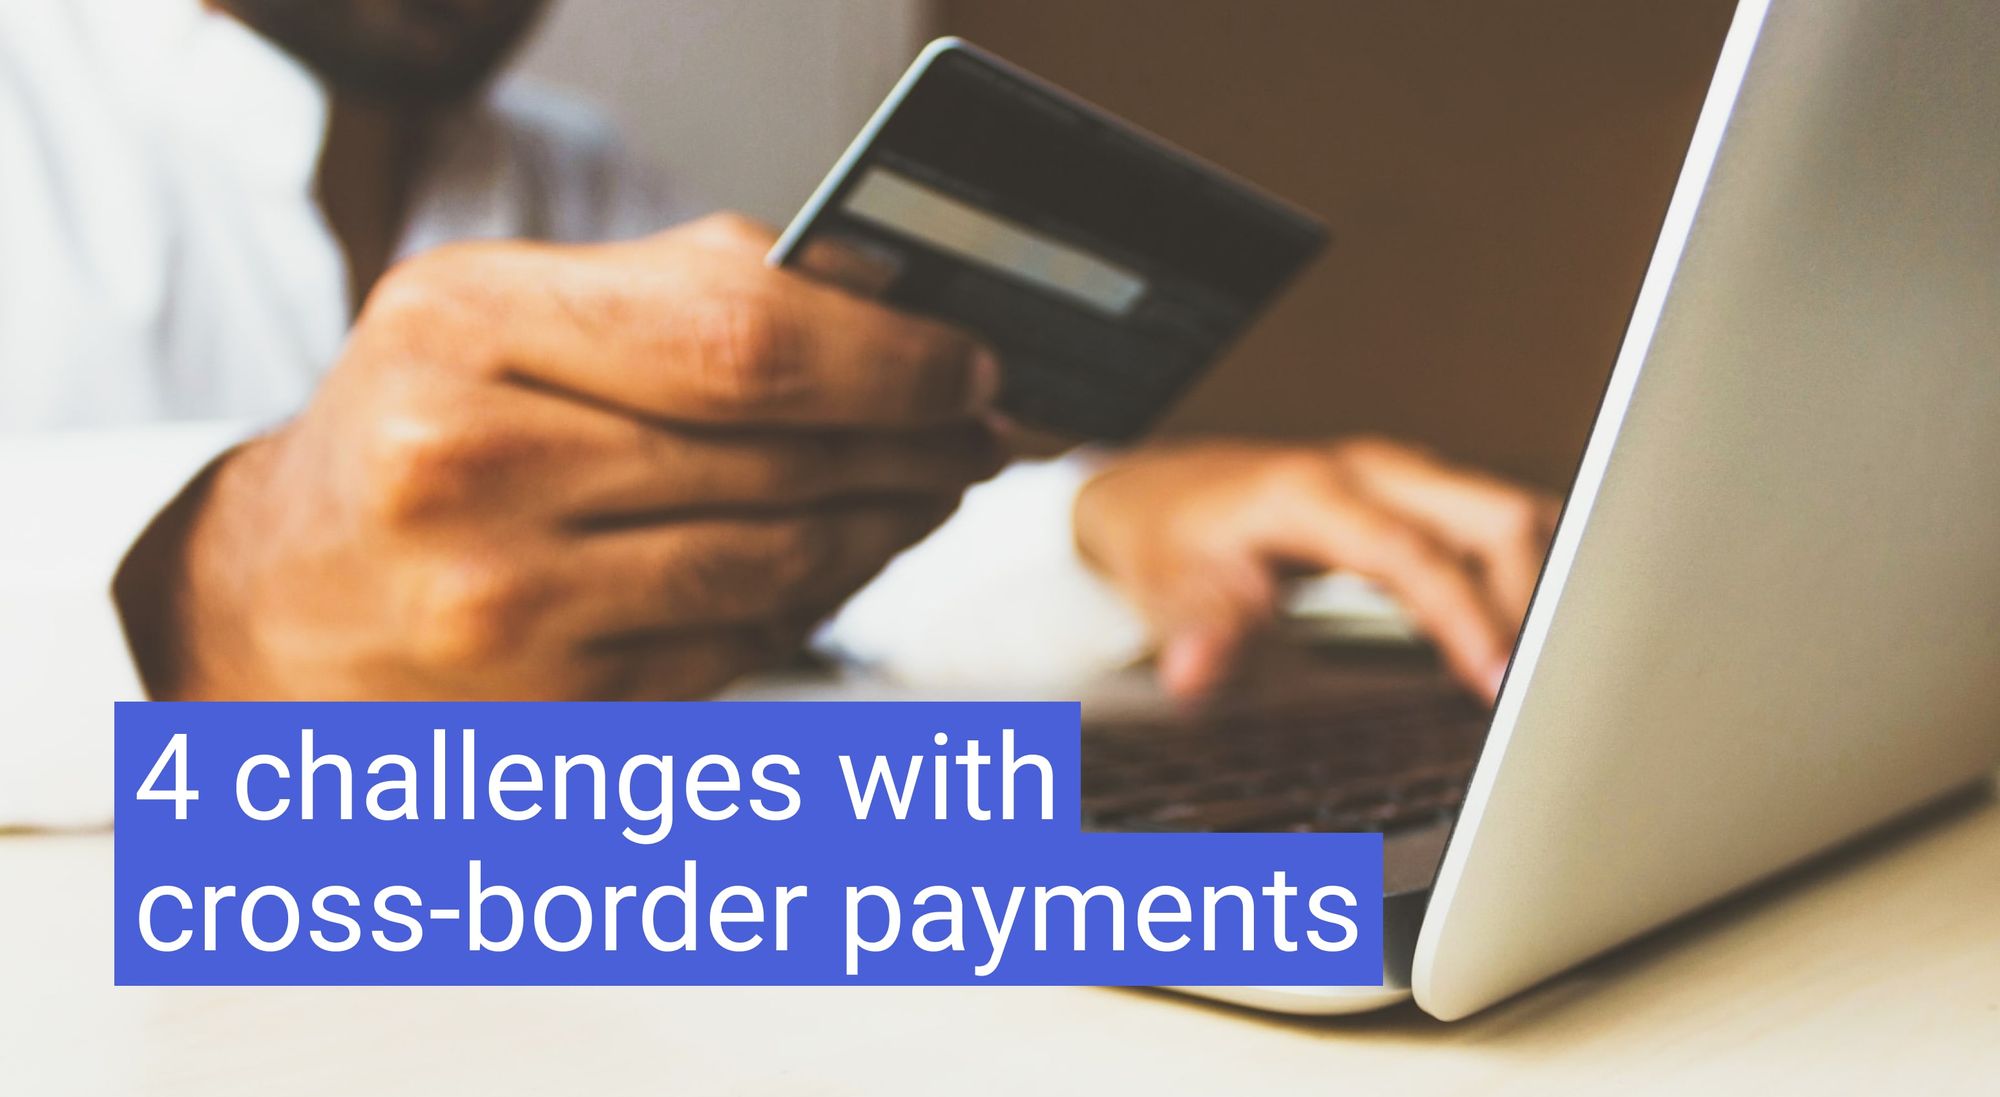 4 challenges with cross-border payments (and how to overcome them)